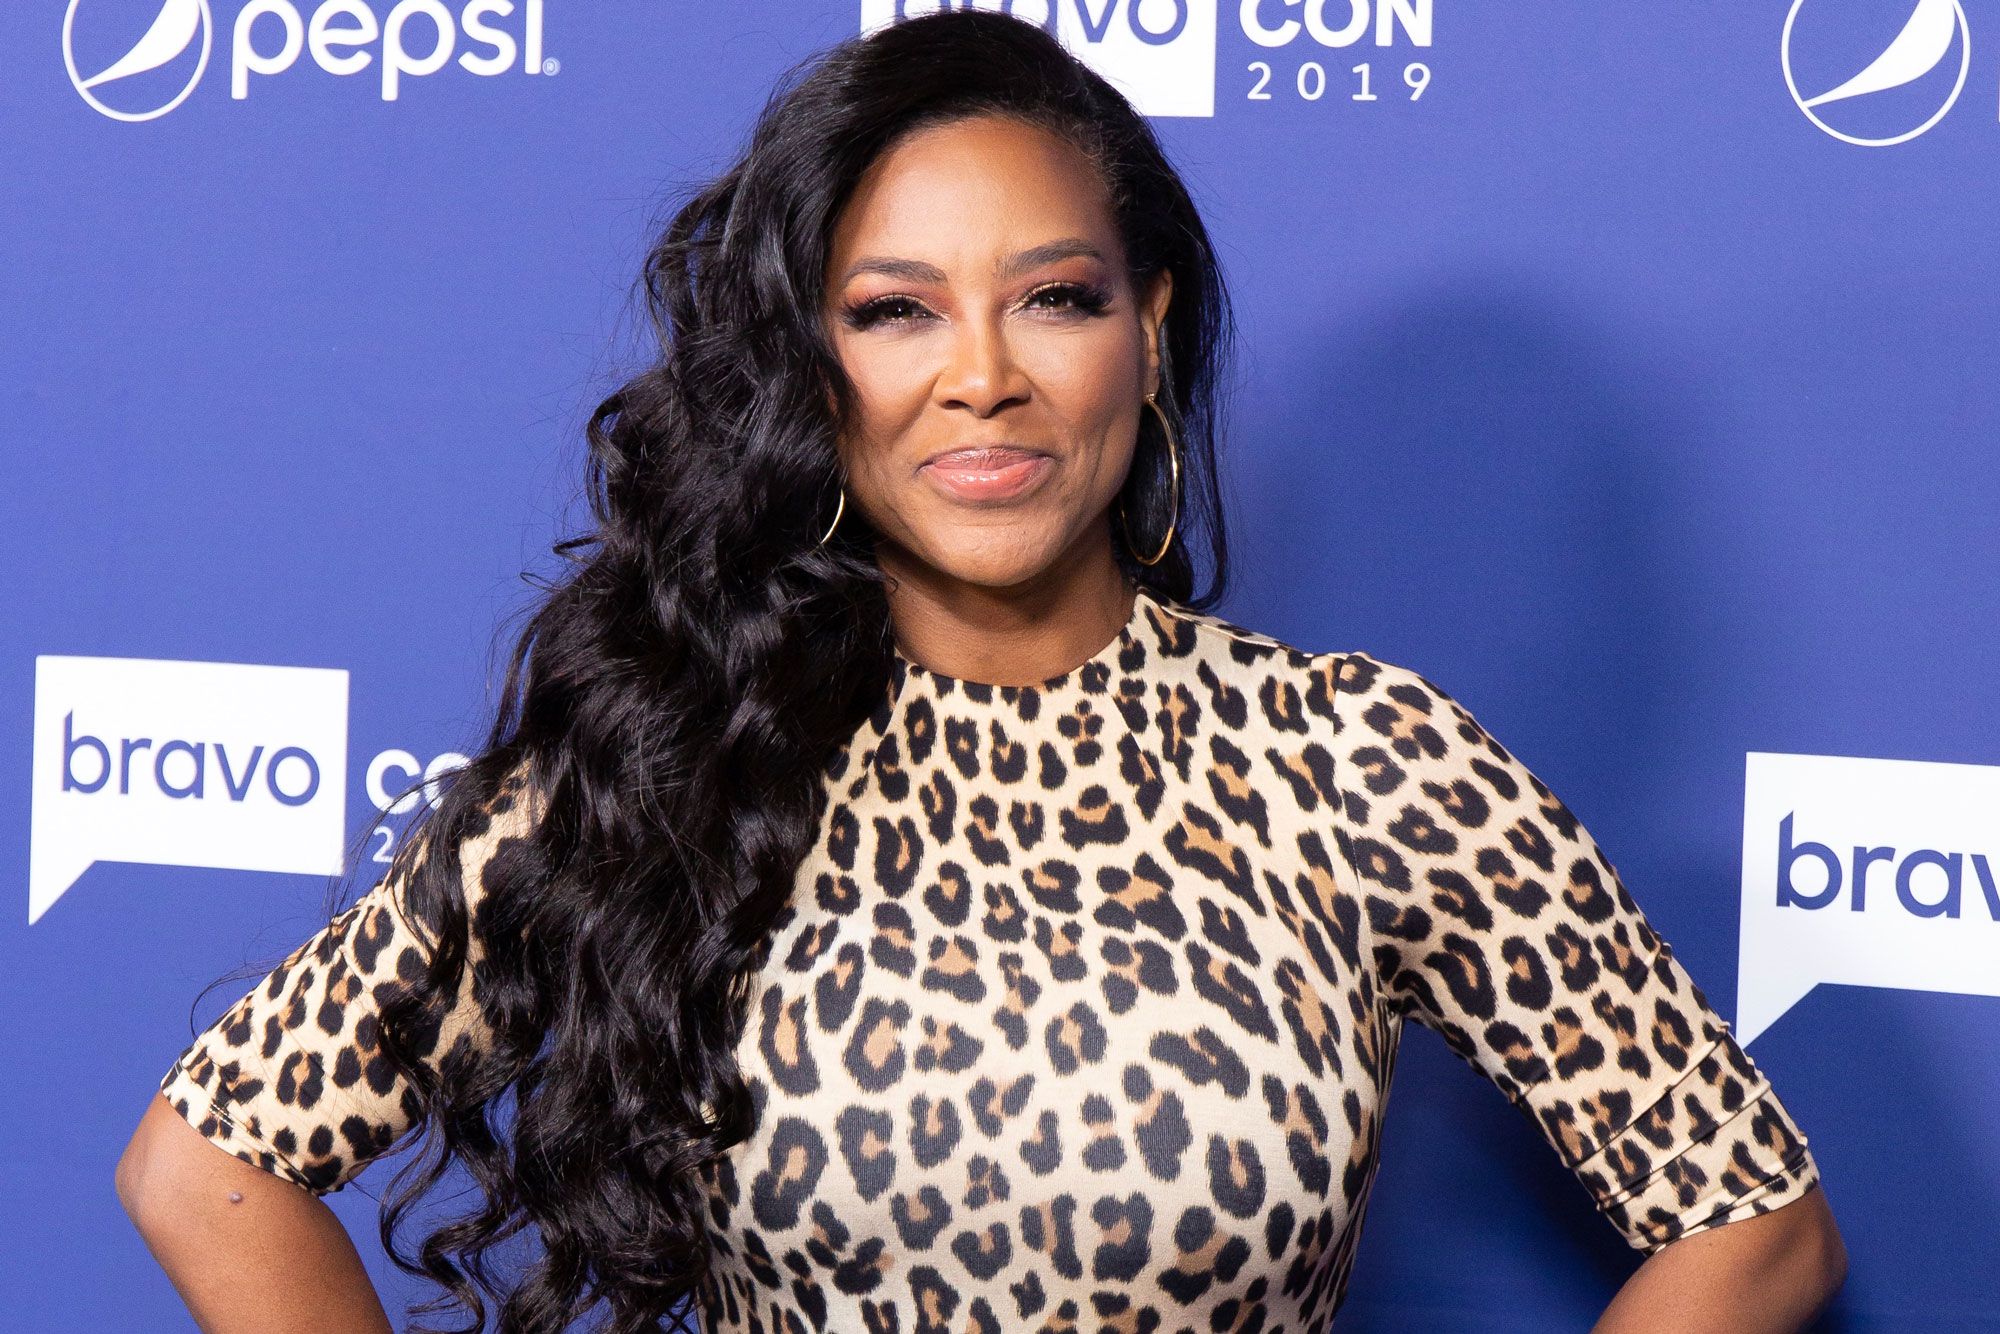 Kenya Moore Impresses Fans With This Throwback Photo - Check It Out Here